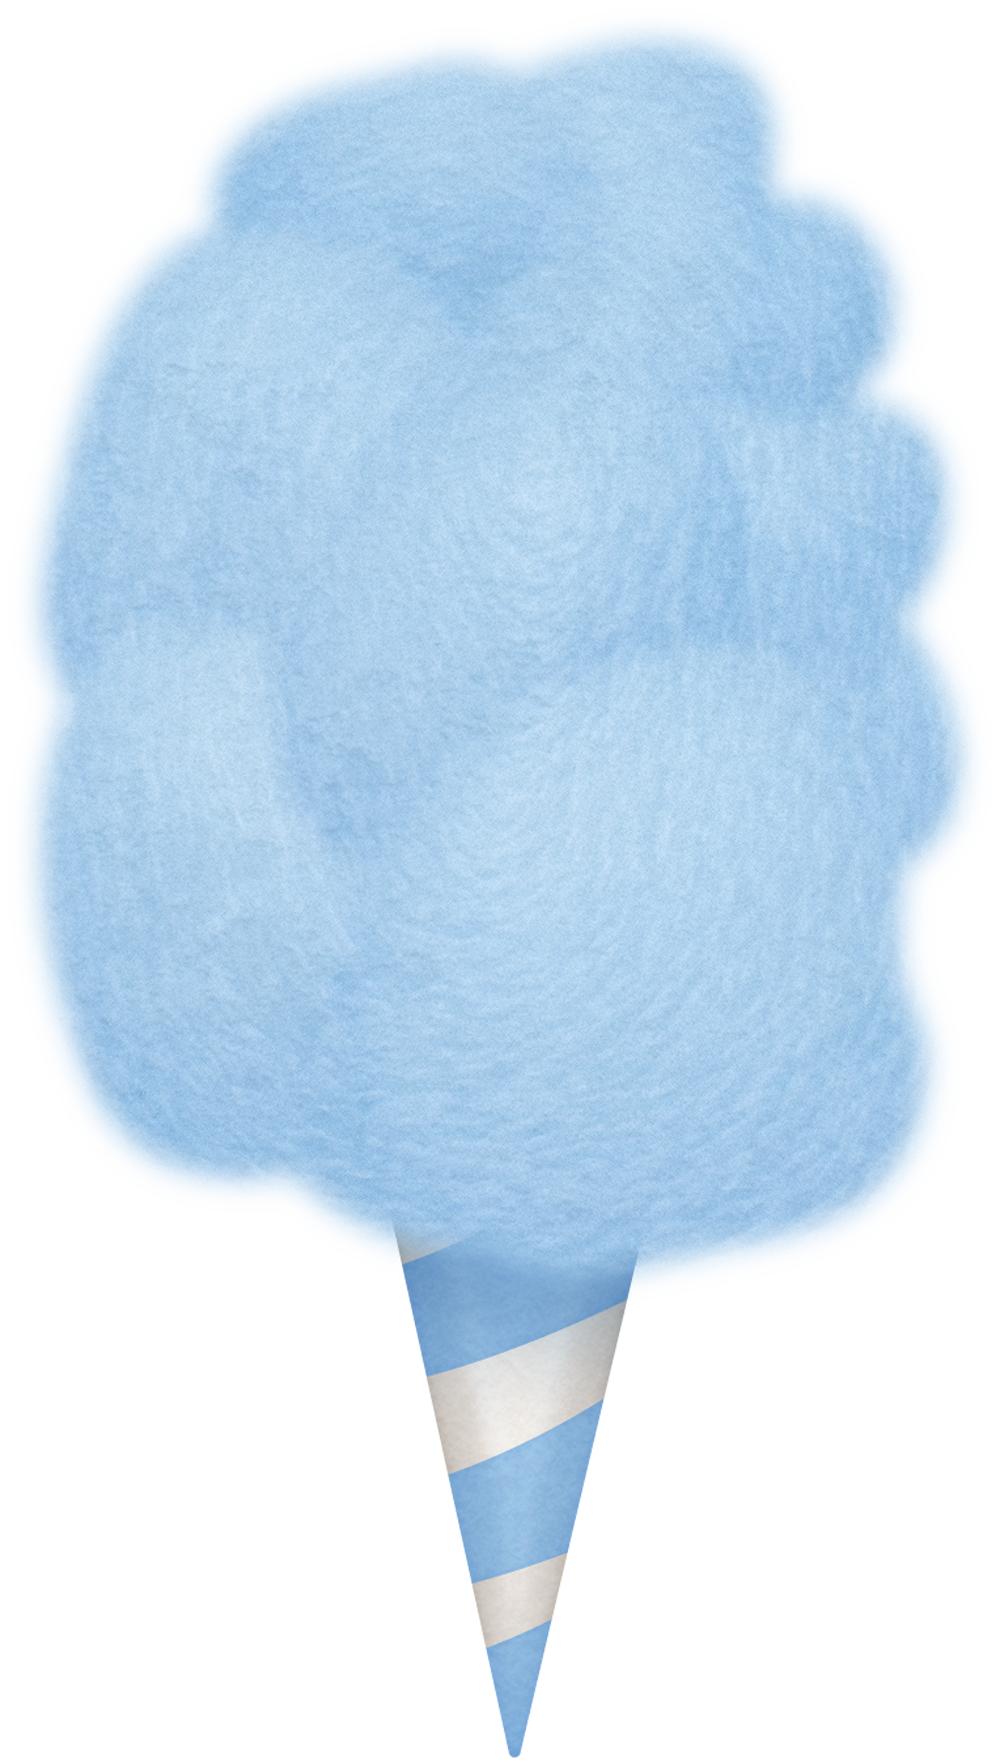 Cotton Candy PNG Background Image